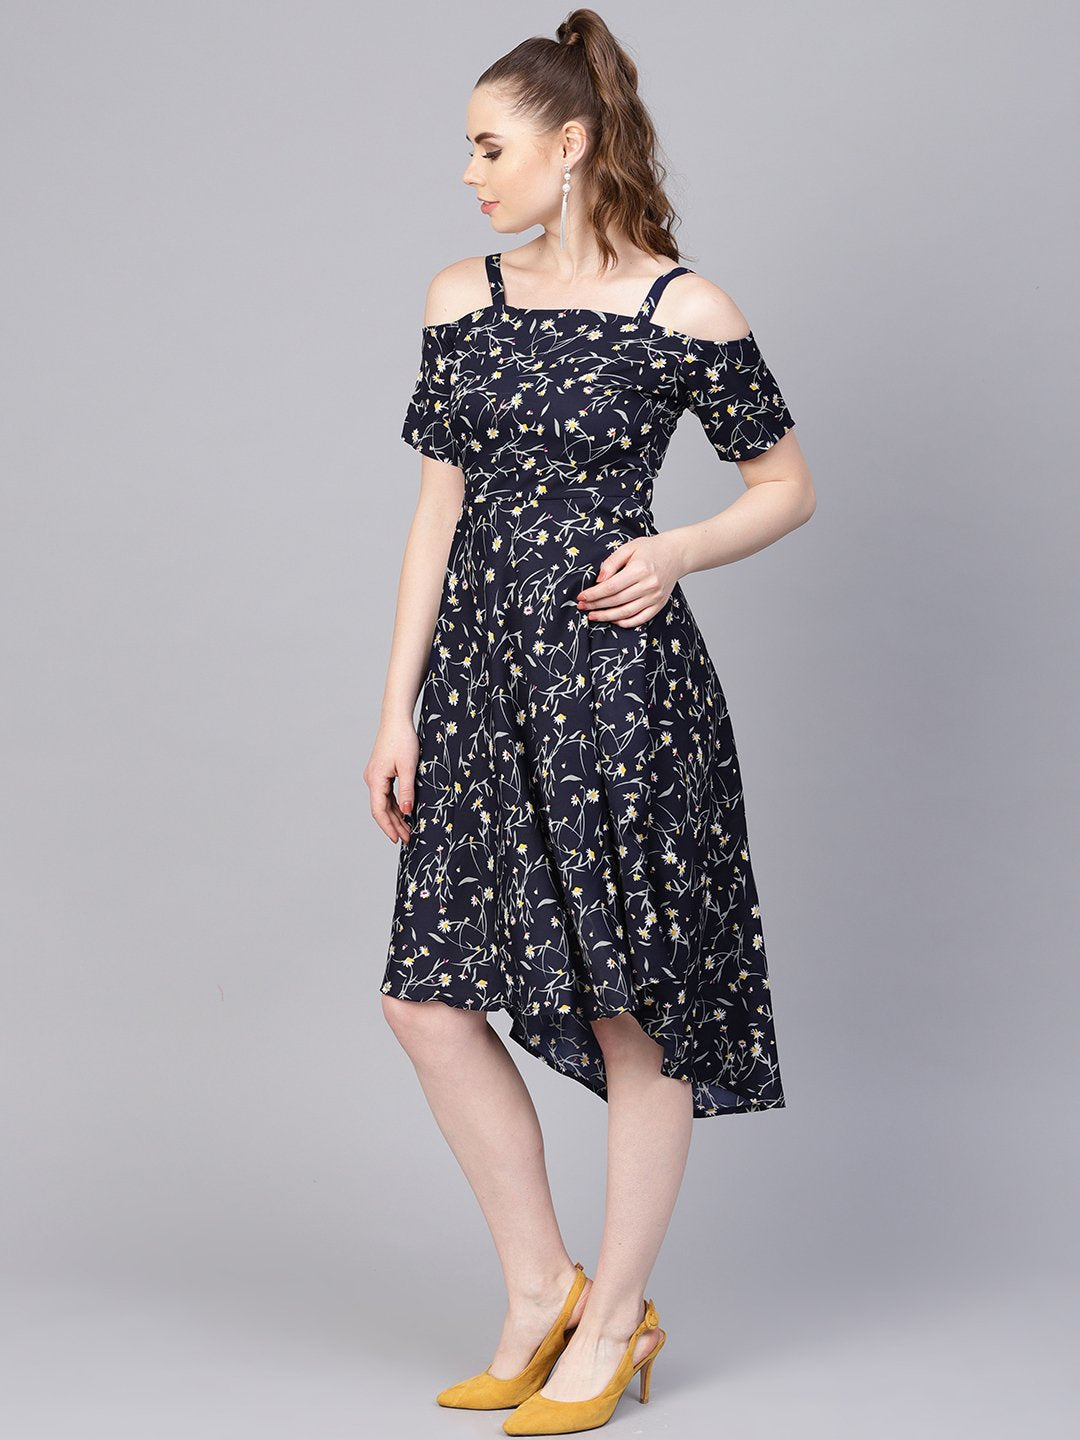 Women's Navy Blue Floral Printed Dress With Shoulder Strap & Detailed Sleeves - Nayo Clothing